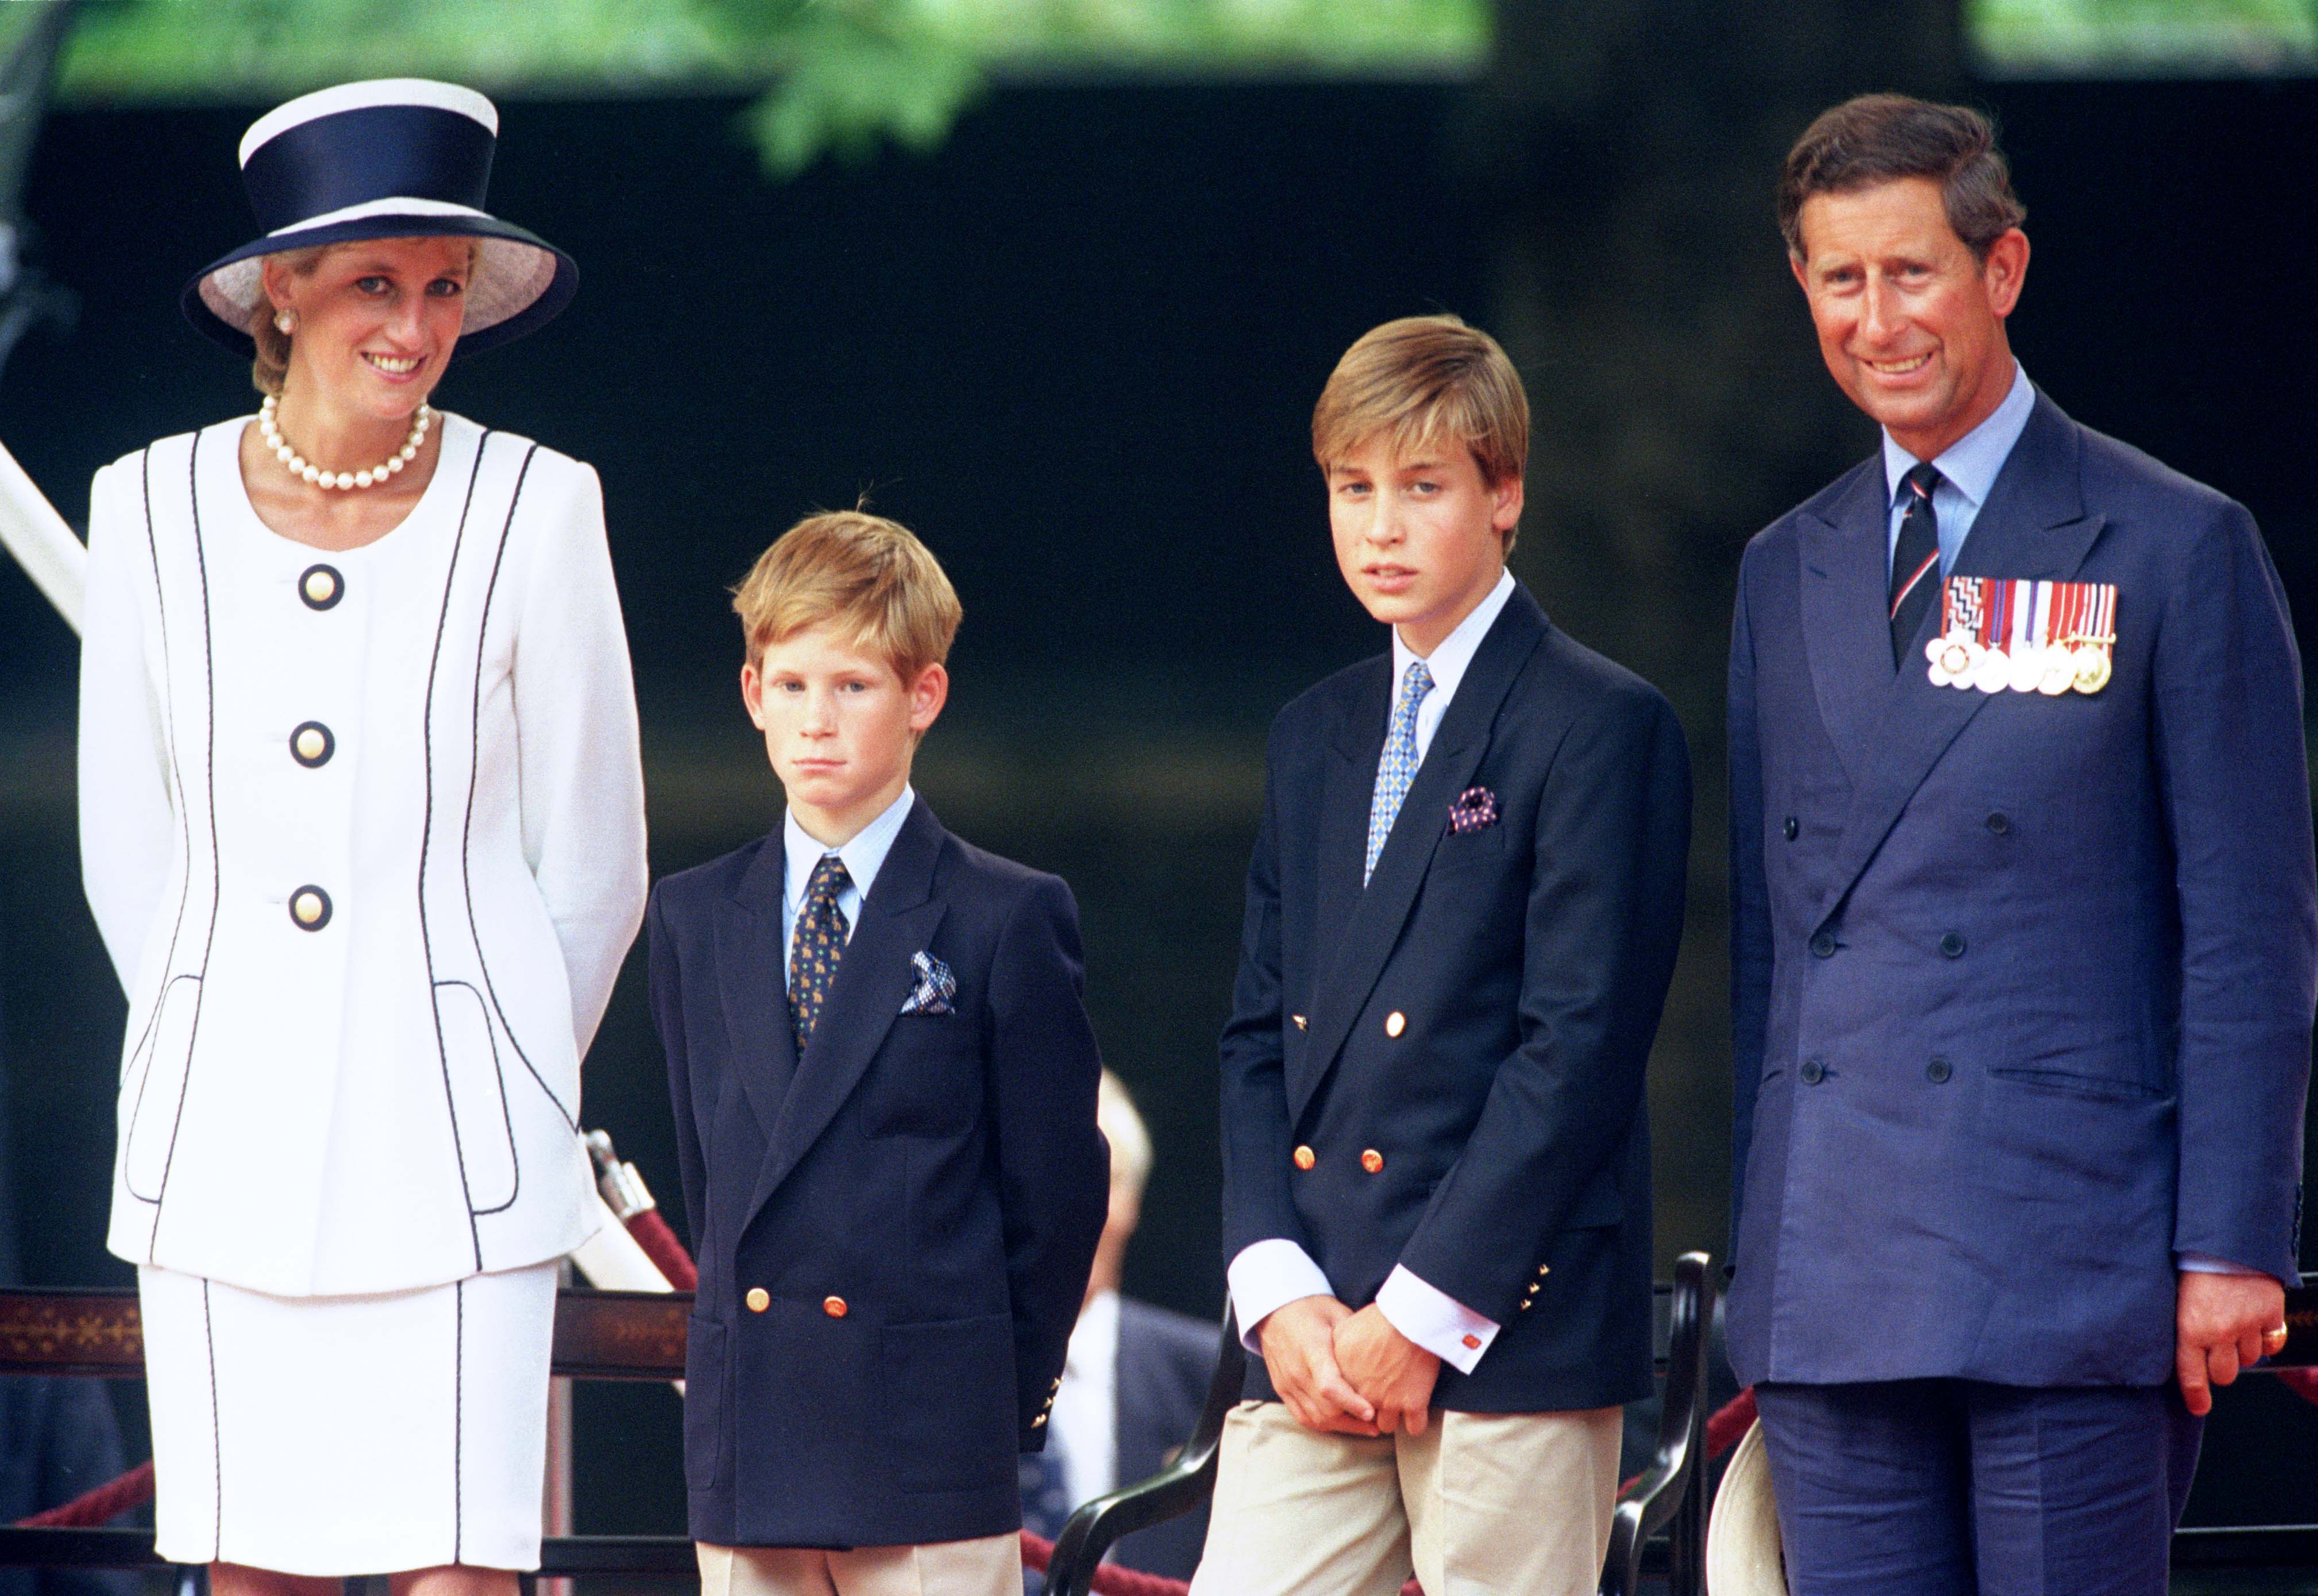 Lady Diana, King Charles, and Princes William & Harry at the Vj Day 50th anniversary celebrations In London. | Source: Getty Images